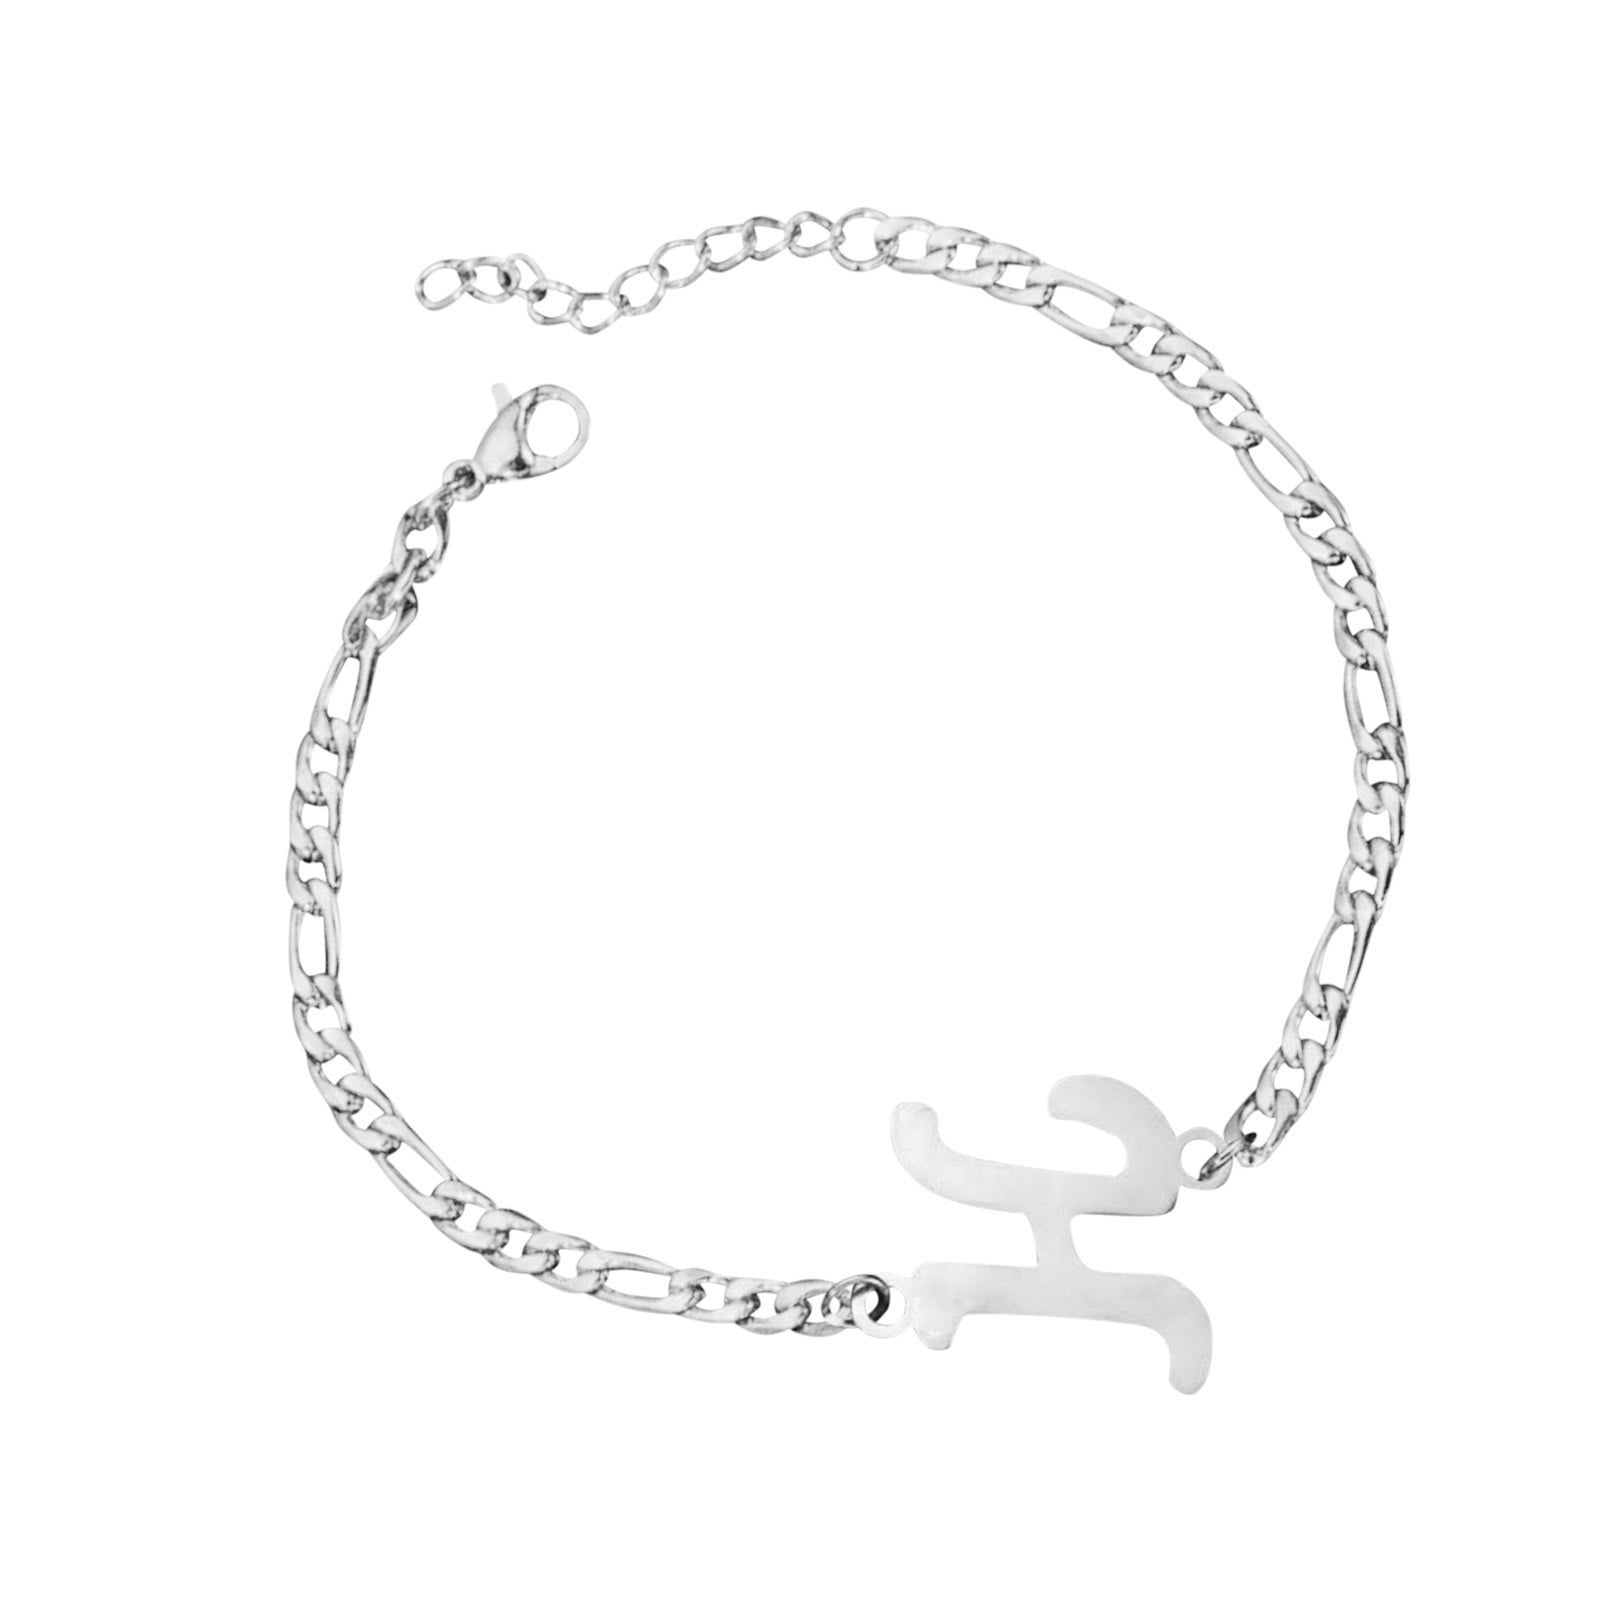 New to Shop: Hand Stamped Initial Bracelet - Project Nursery